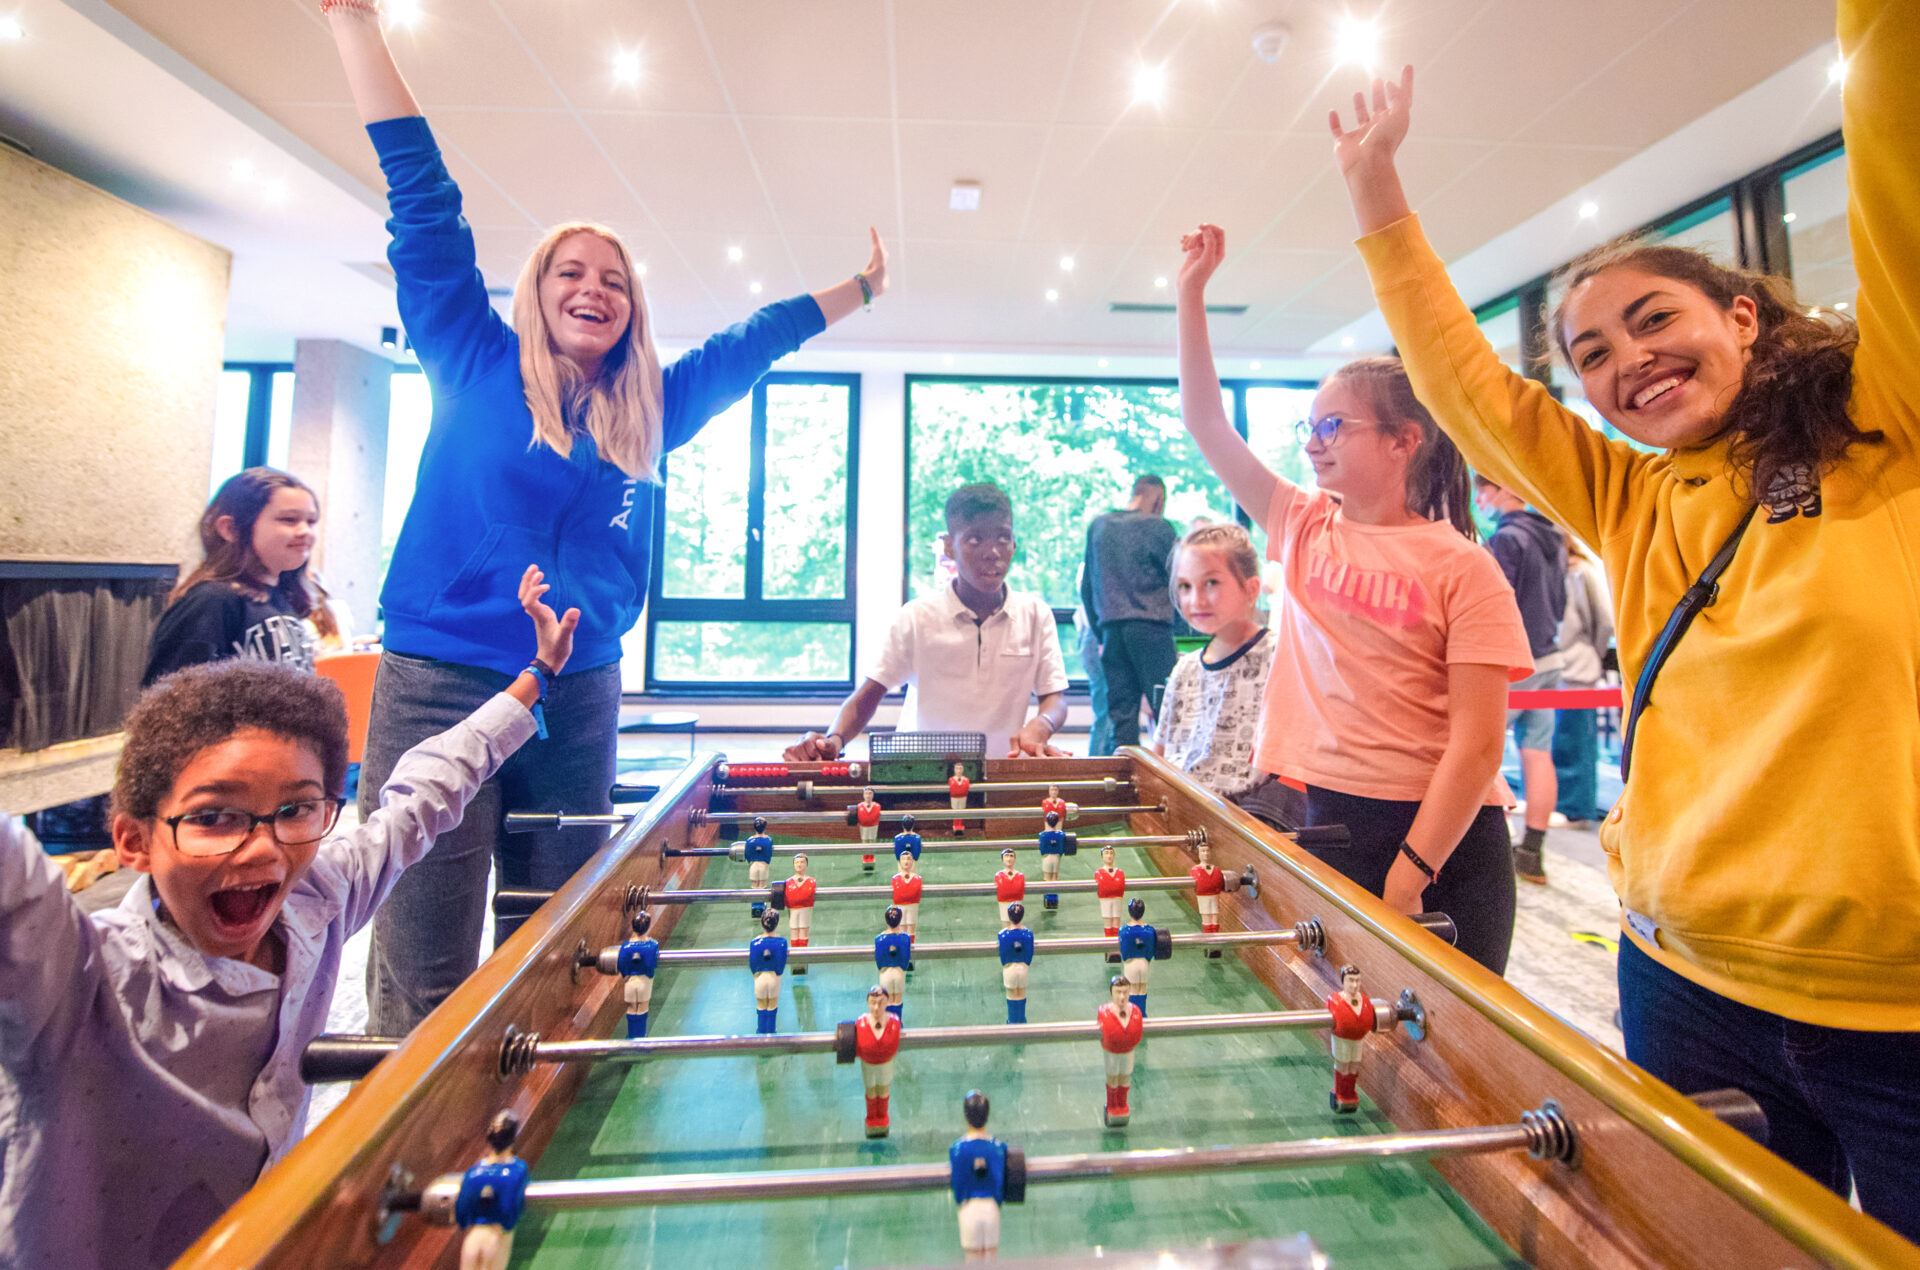 An image of a family playing on the table football table